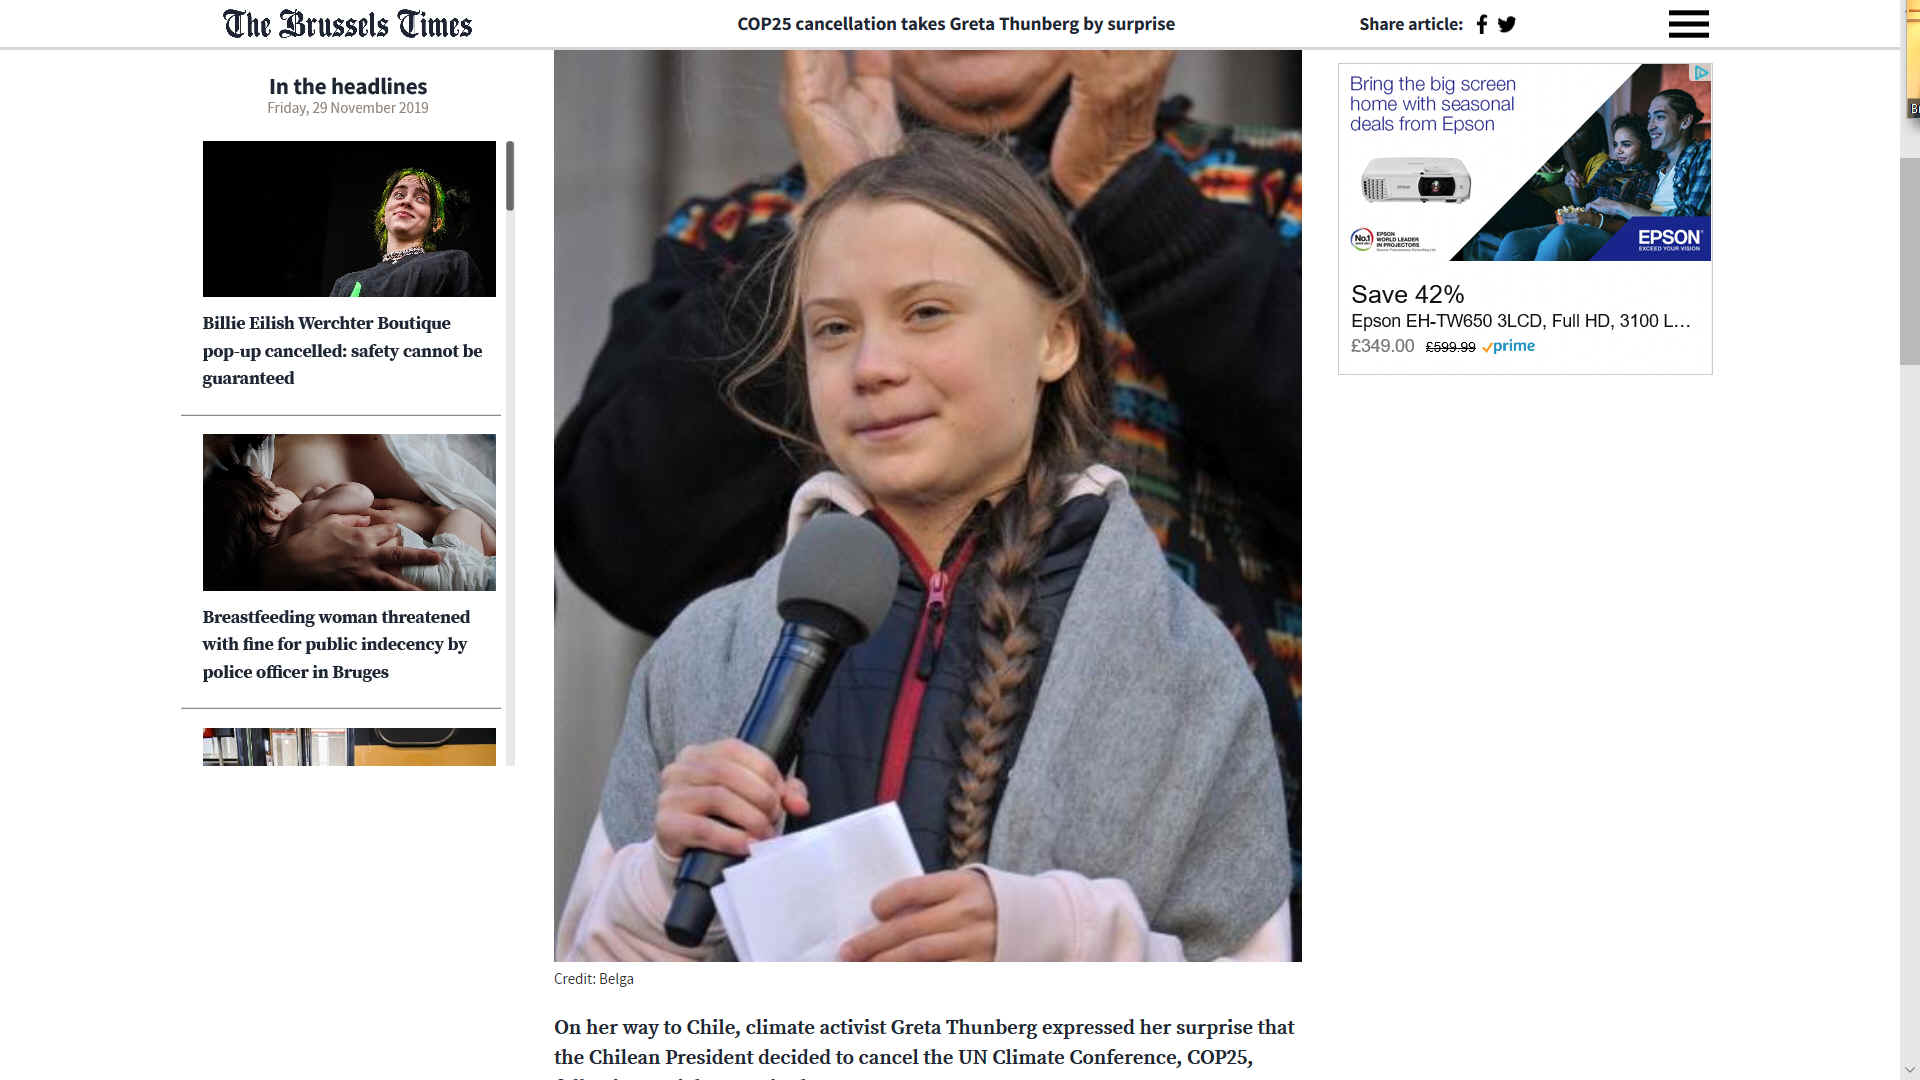 Greta Thunberg stranded in the USA, asks for help to get to Europe